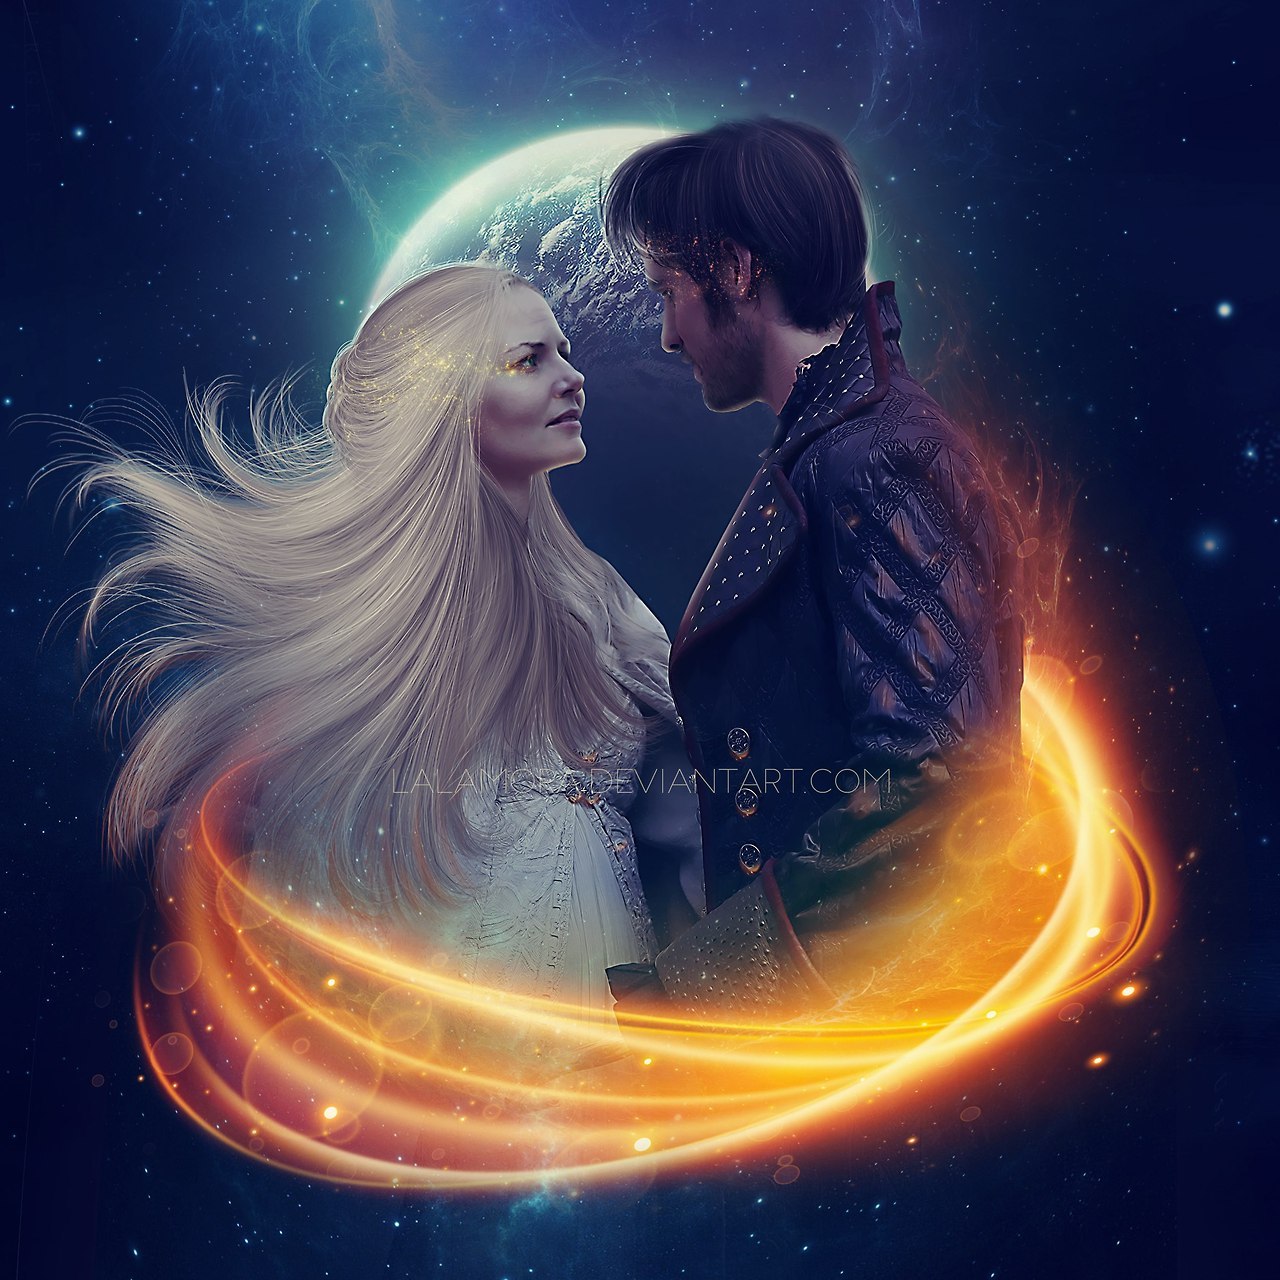 Le Captain Swan - Page 10 Tumblr_on2t42ftZK1rms2cvo1_1280